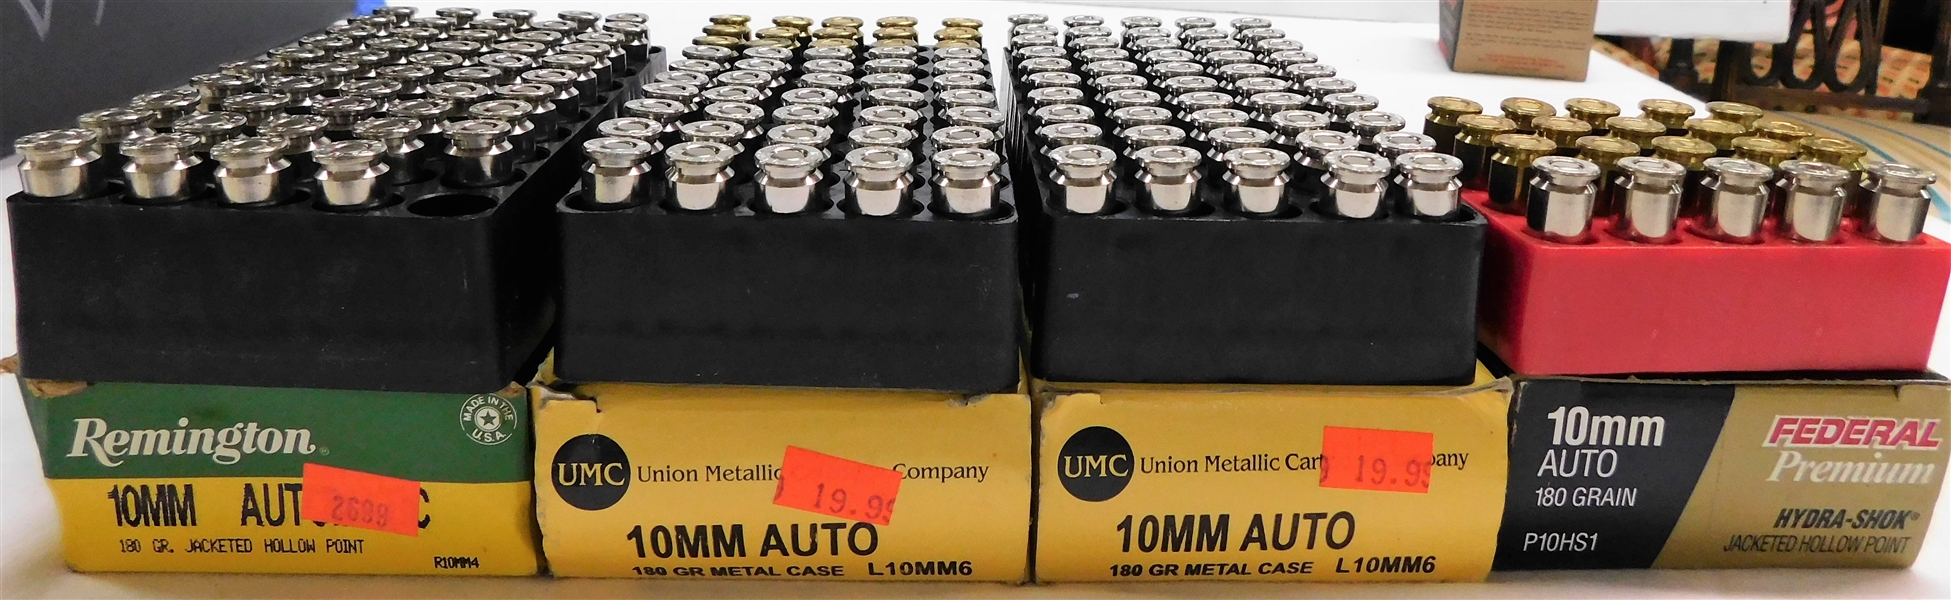 Lot of 10mm Auto Bullets including 3 Boxes of 50 and 1 of 20 - 1 Box Missing 1 - See Photos for Brands